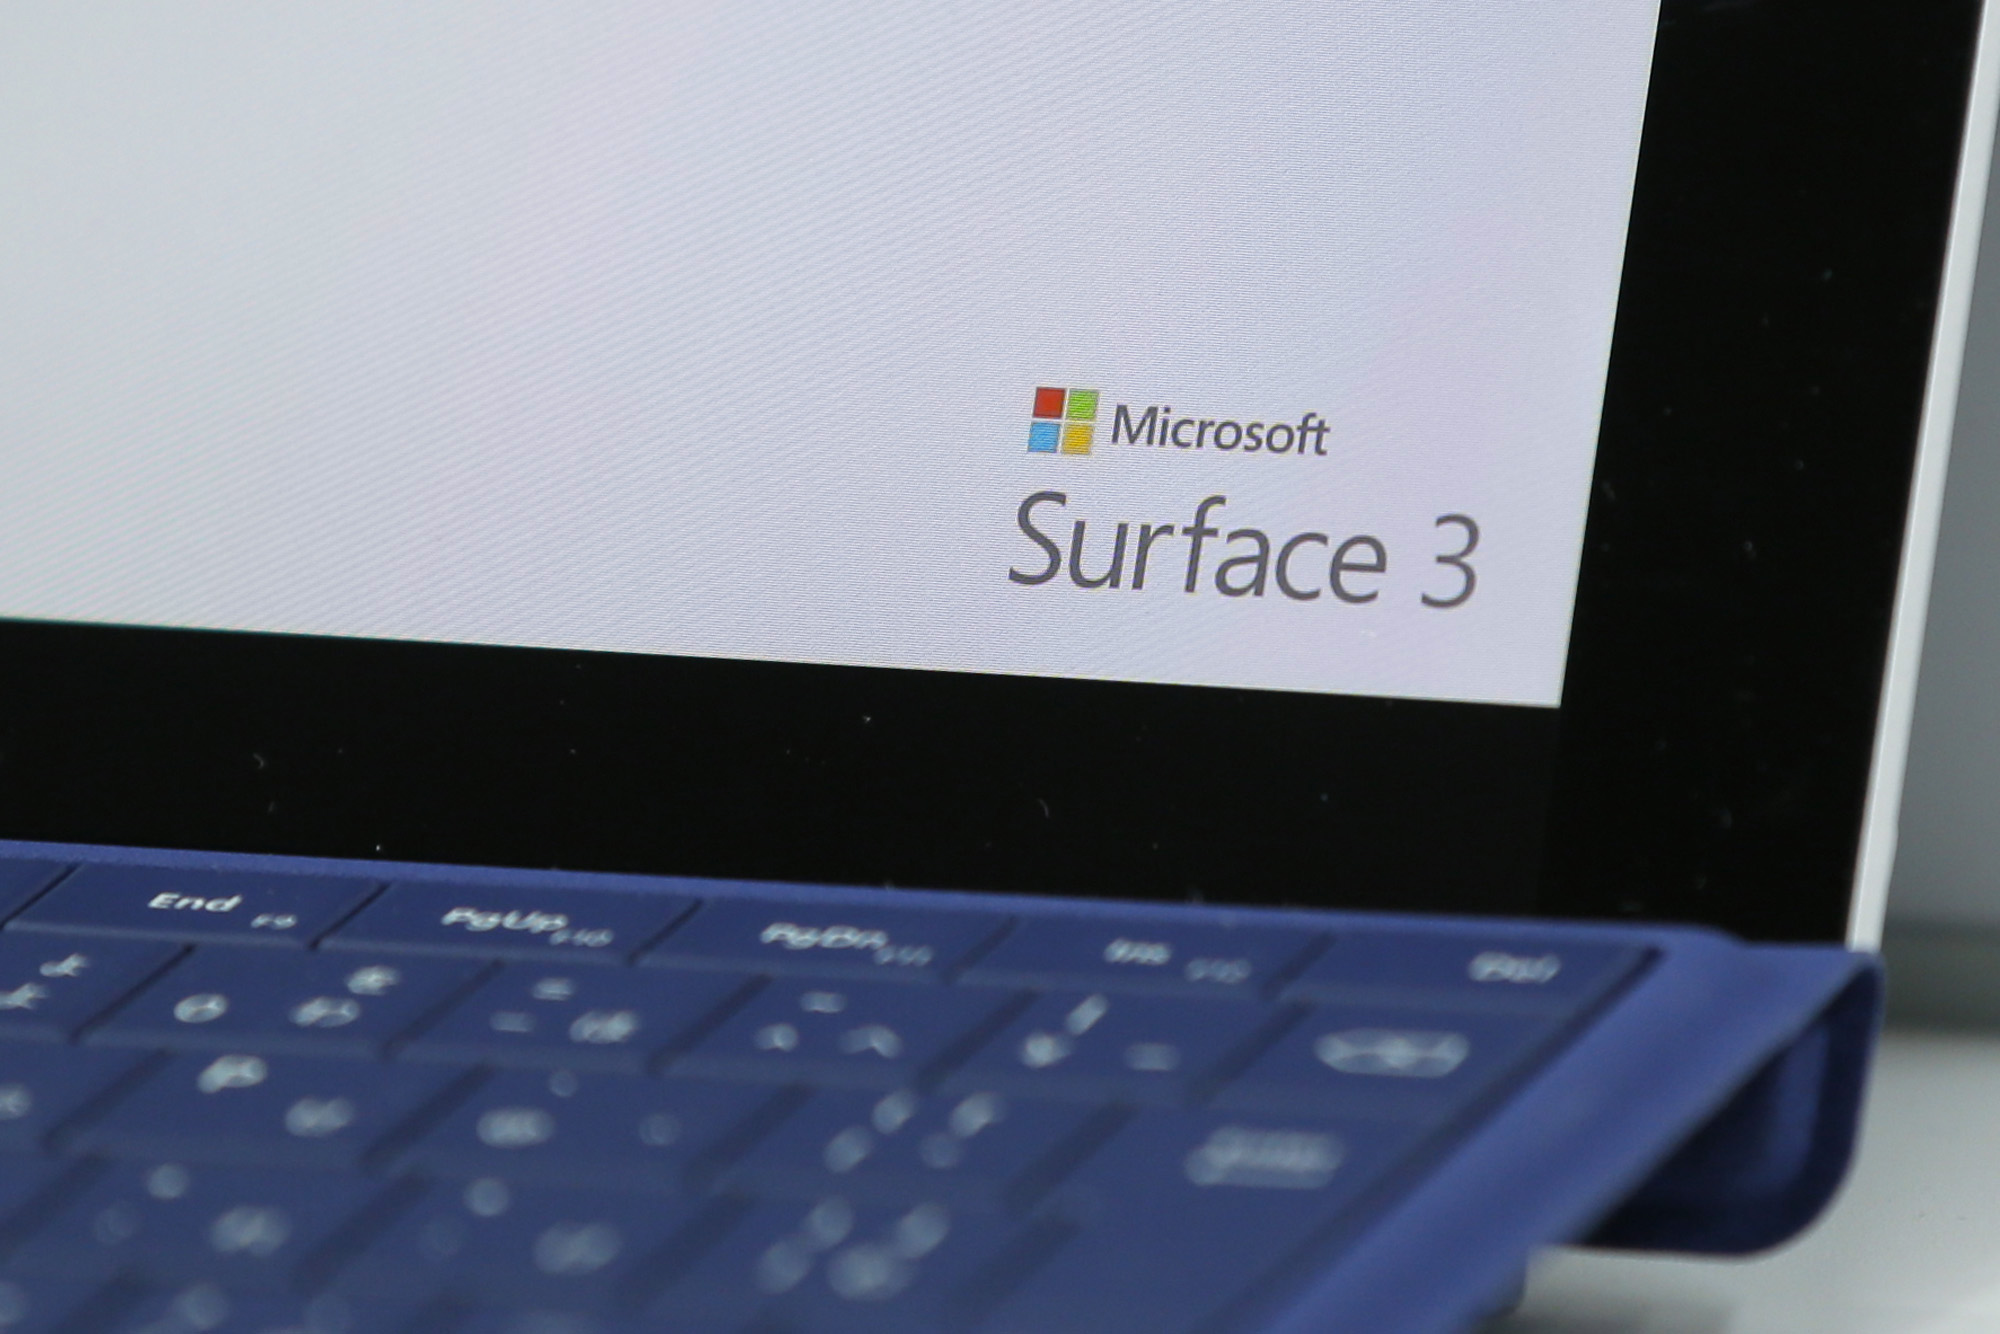 Inside The Windows Floor At A BigCamera Inc. Store As Microsoft Corp. Begins To Sell Surface 3